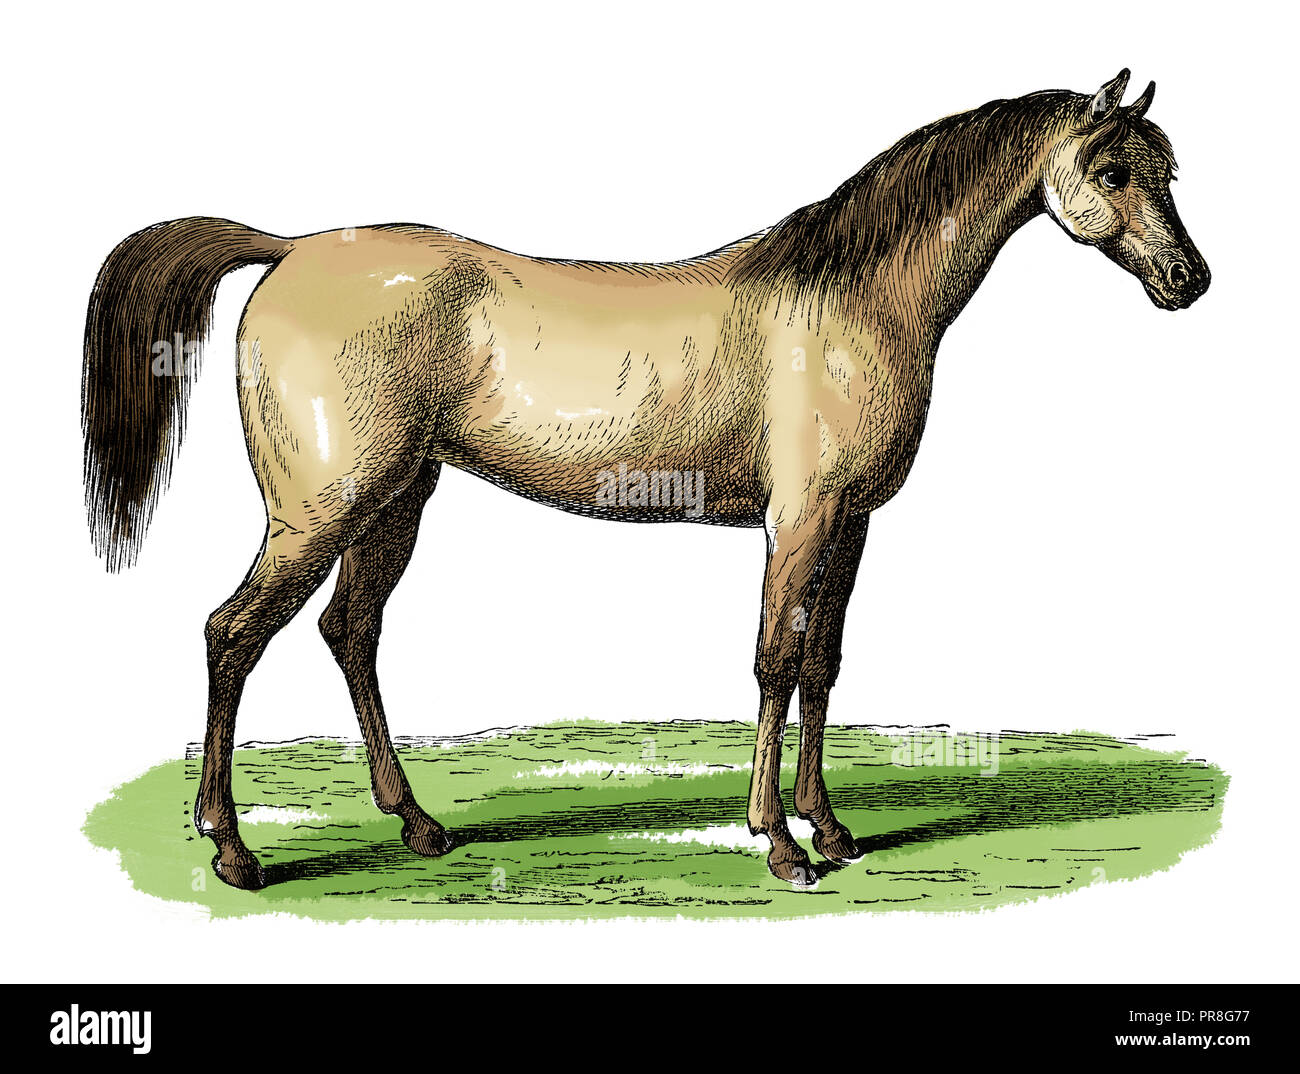 19th century illustration (hand-painted engraving) of a horse. Published in Systematischer Bilder-Atlas. Stock Photo